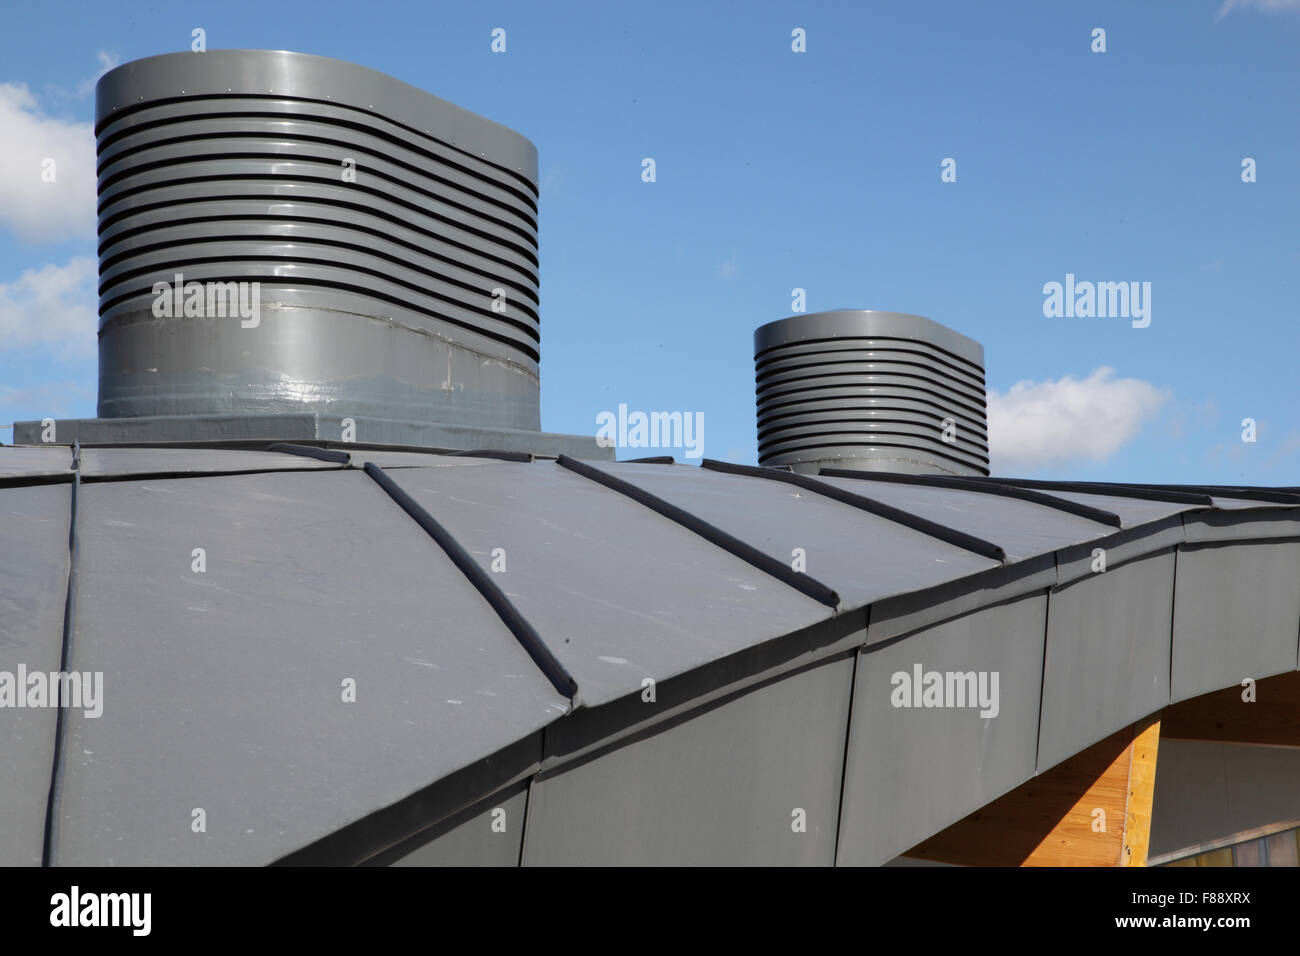 Roof detail on the MyPlace youth centre in Hackney, showing curved zinc cladding and wind catcher ventilation outlets Stock Photo